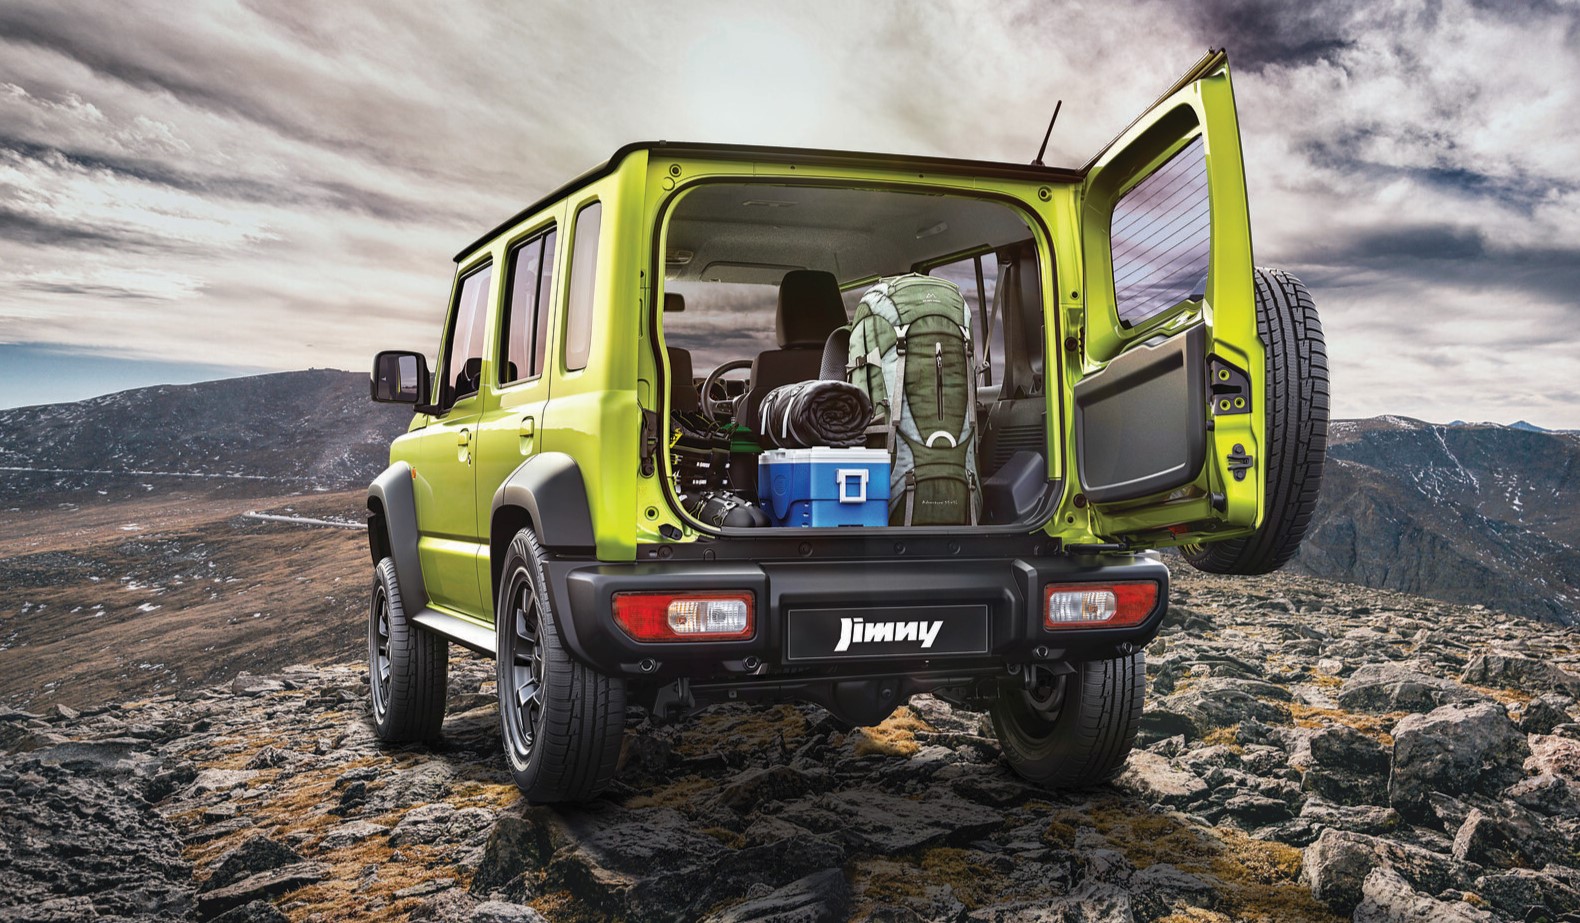 suzuki, suzuki jimny, suzuki jimny 5-door, new suzuki jimny 5-door officially launched in south africa – pricing and features